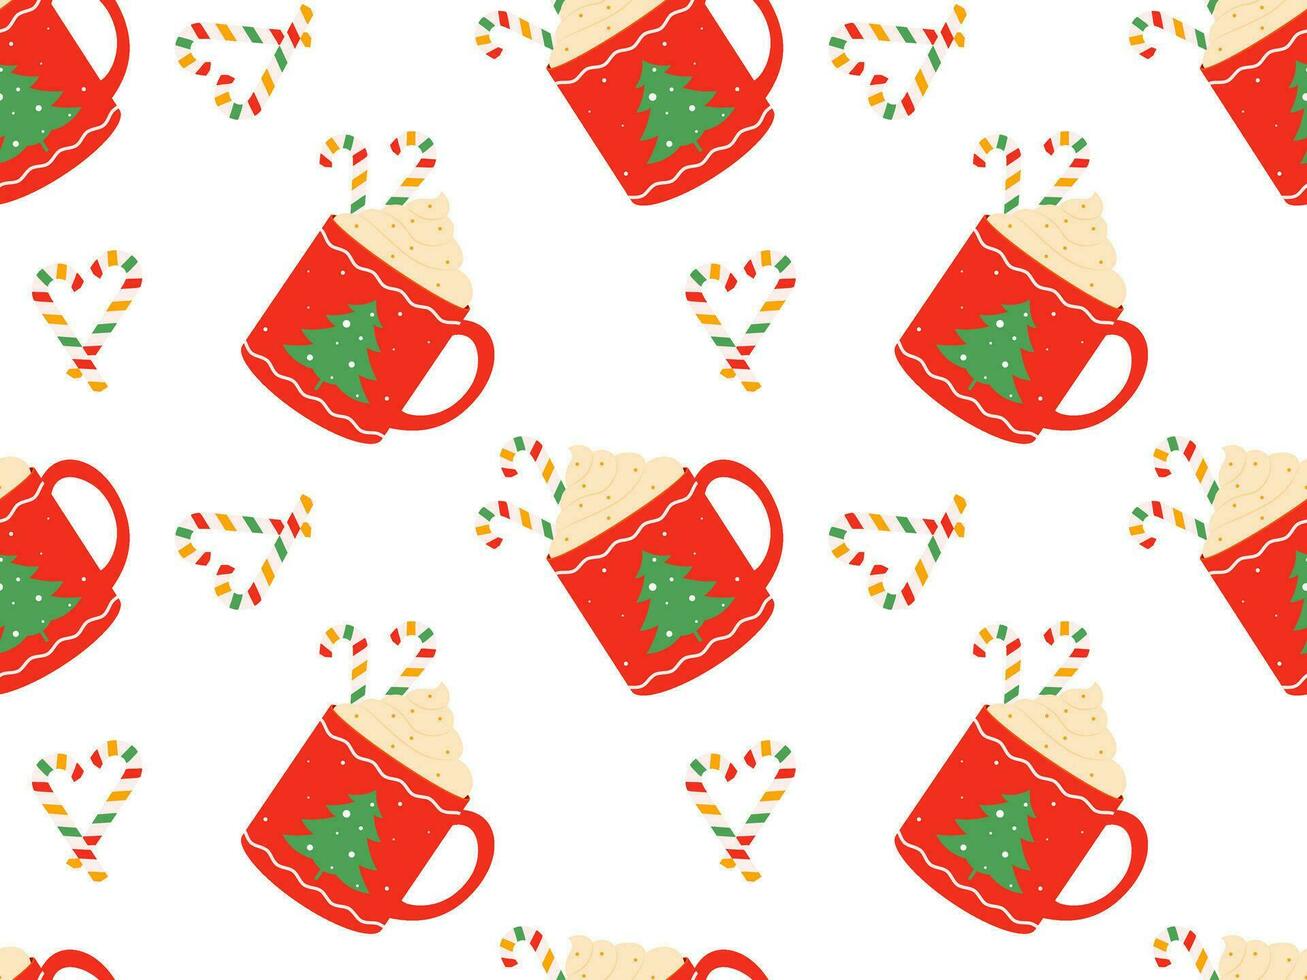 Hot drinks pattern. Seamless Cups with warm drink variants. Vector flat repeated background for wallpaper, wrapping, packing, textile